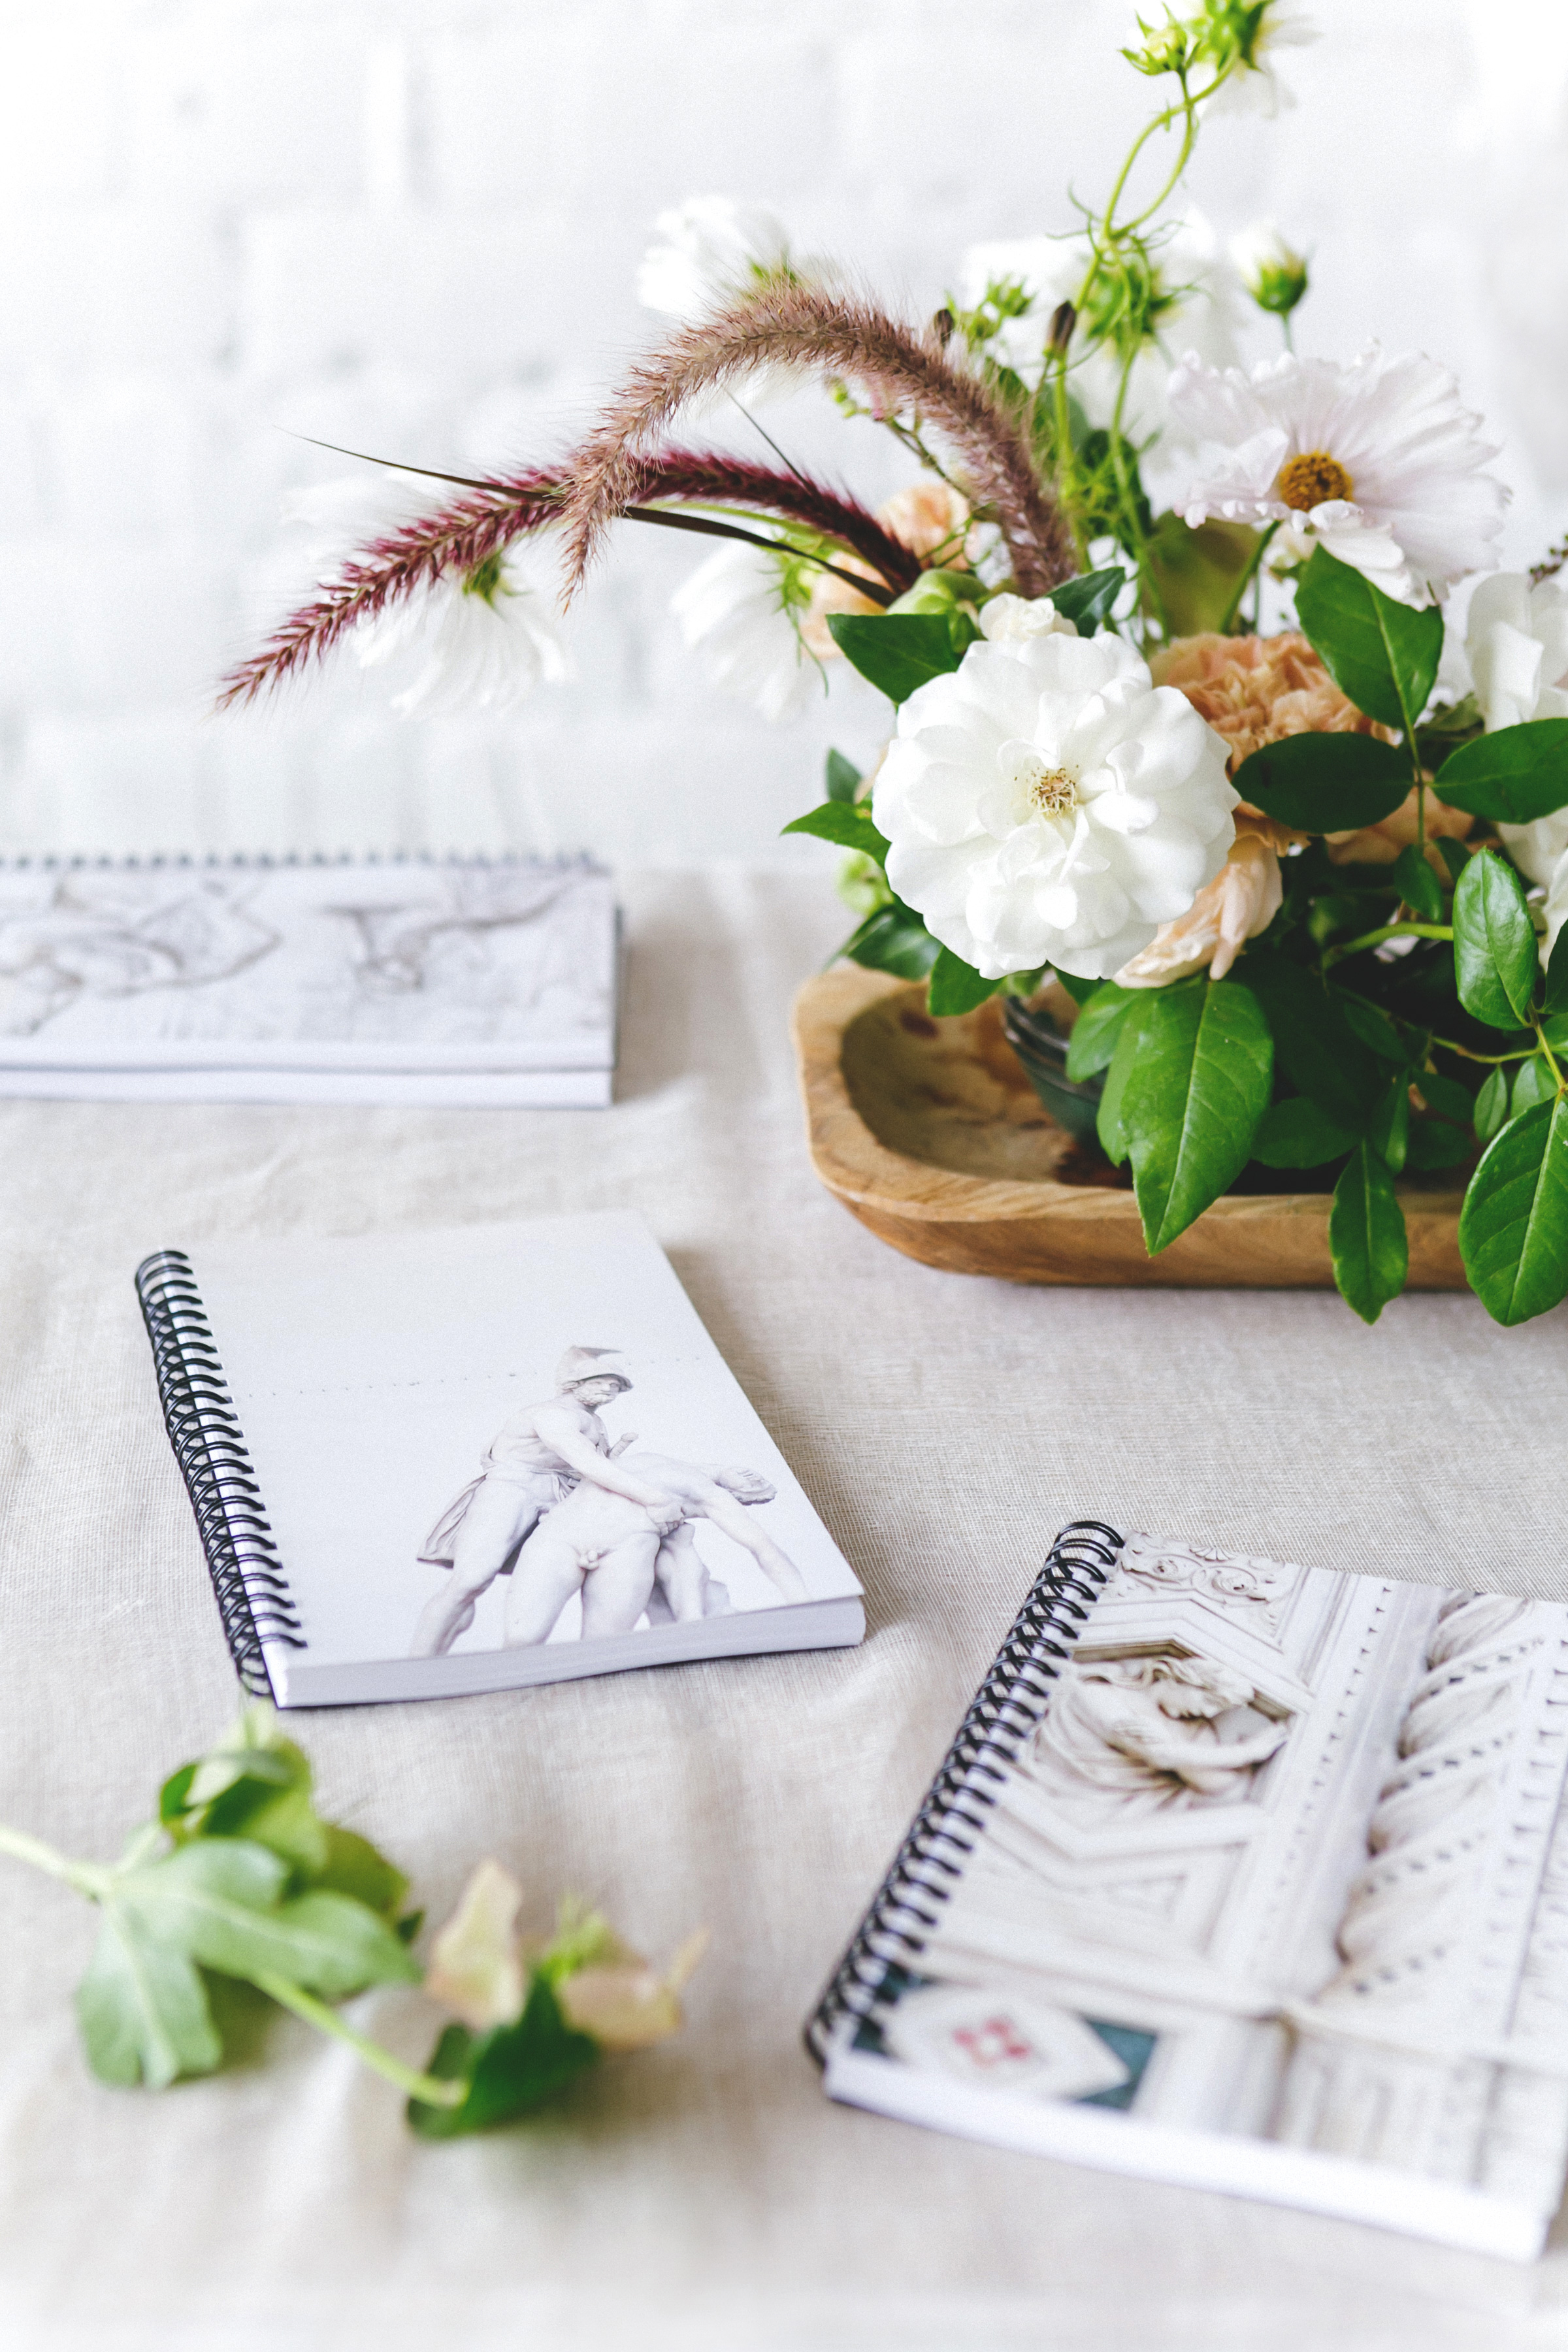 DIY custom notebooks make perfect take-home favors for guests!